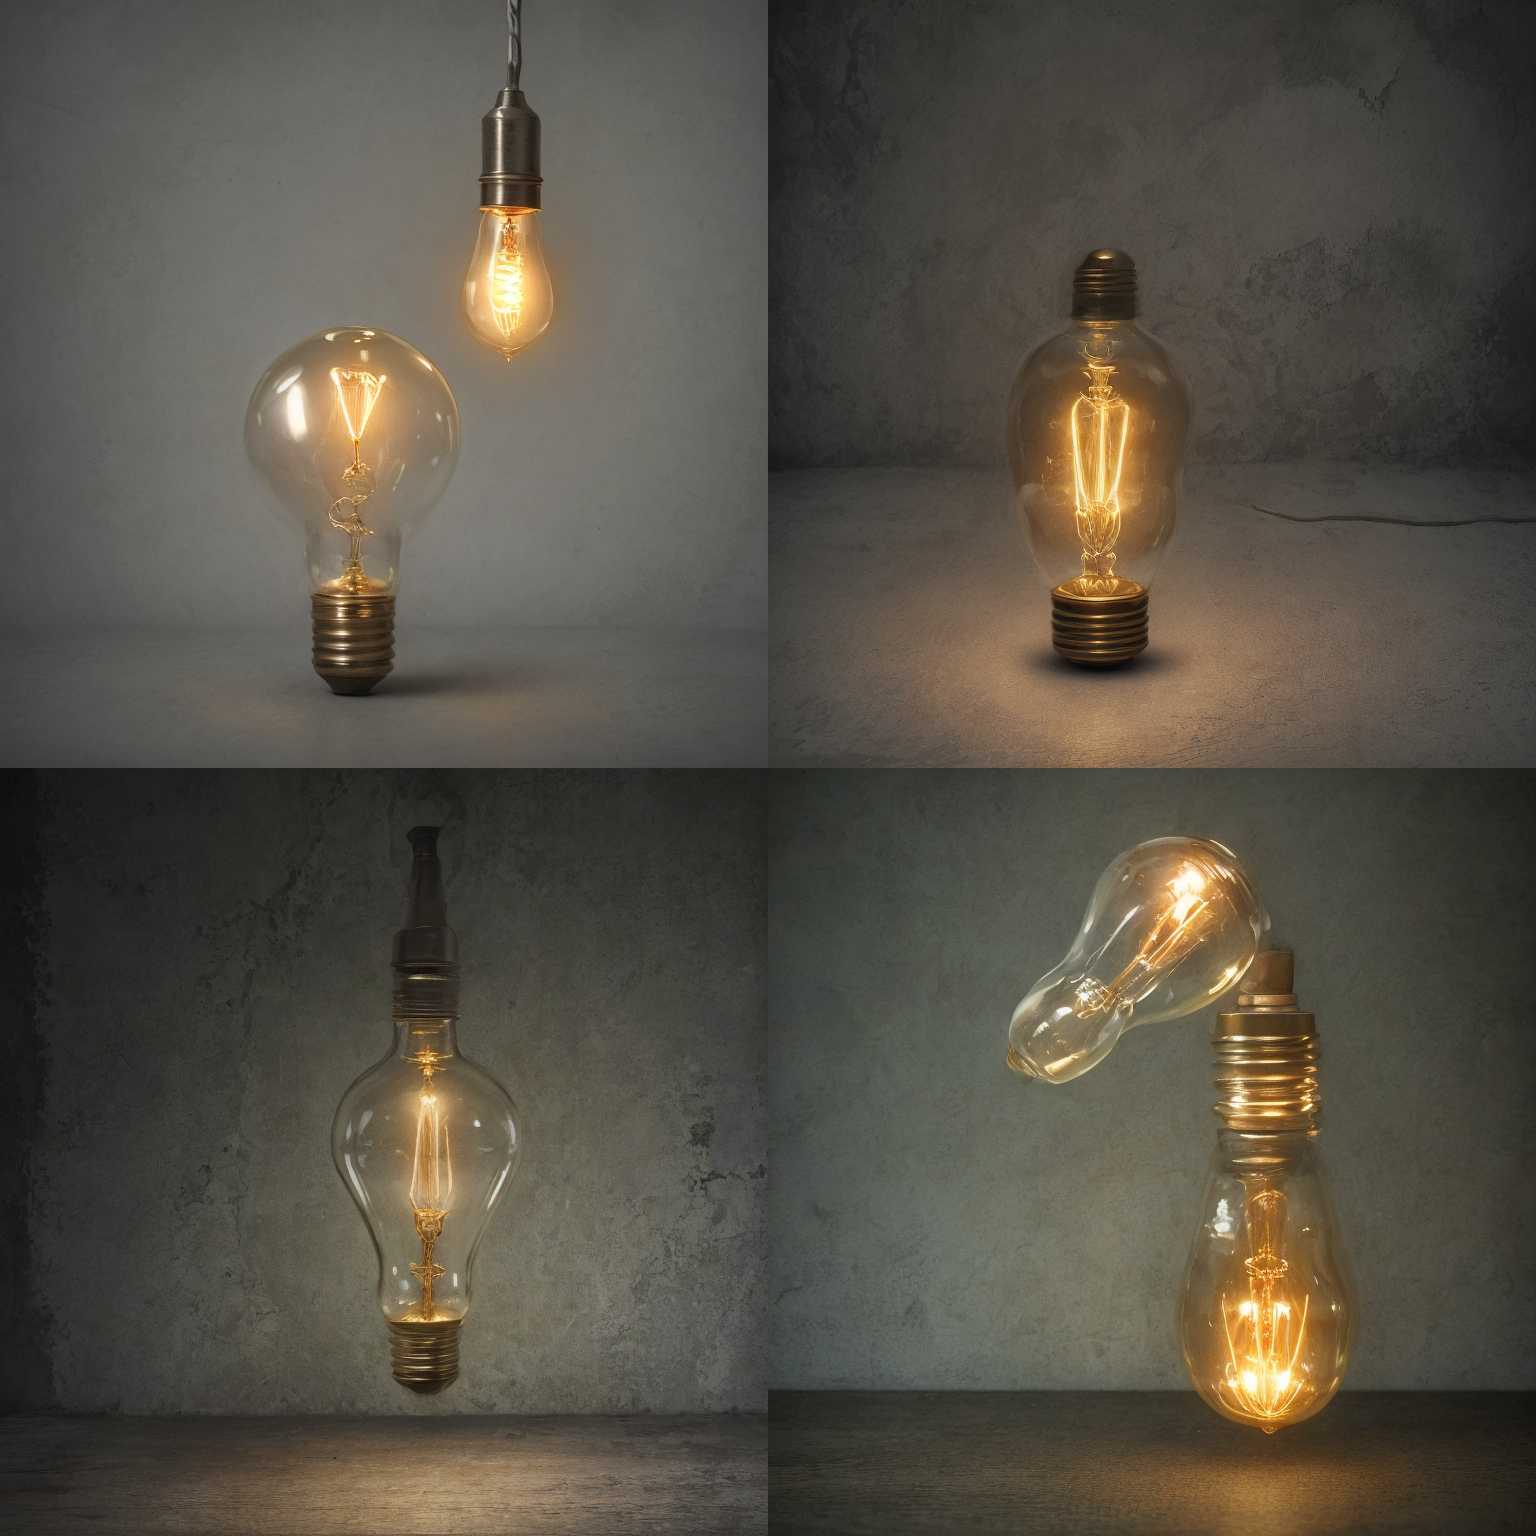 A lightbulb without electricity